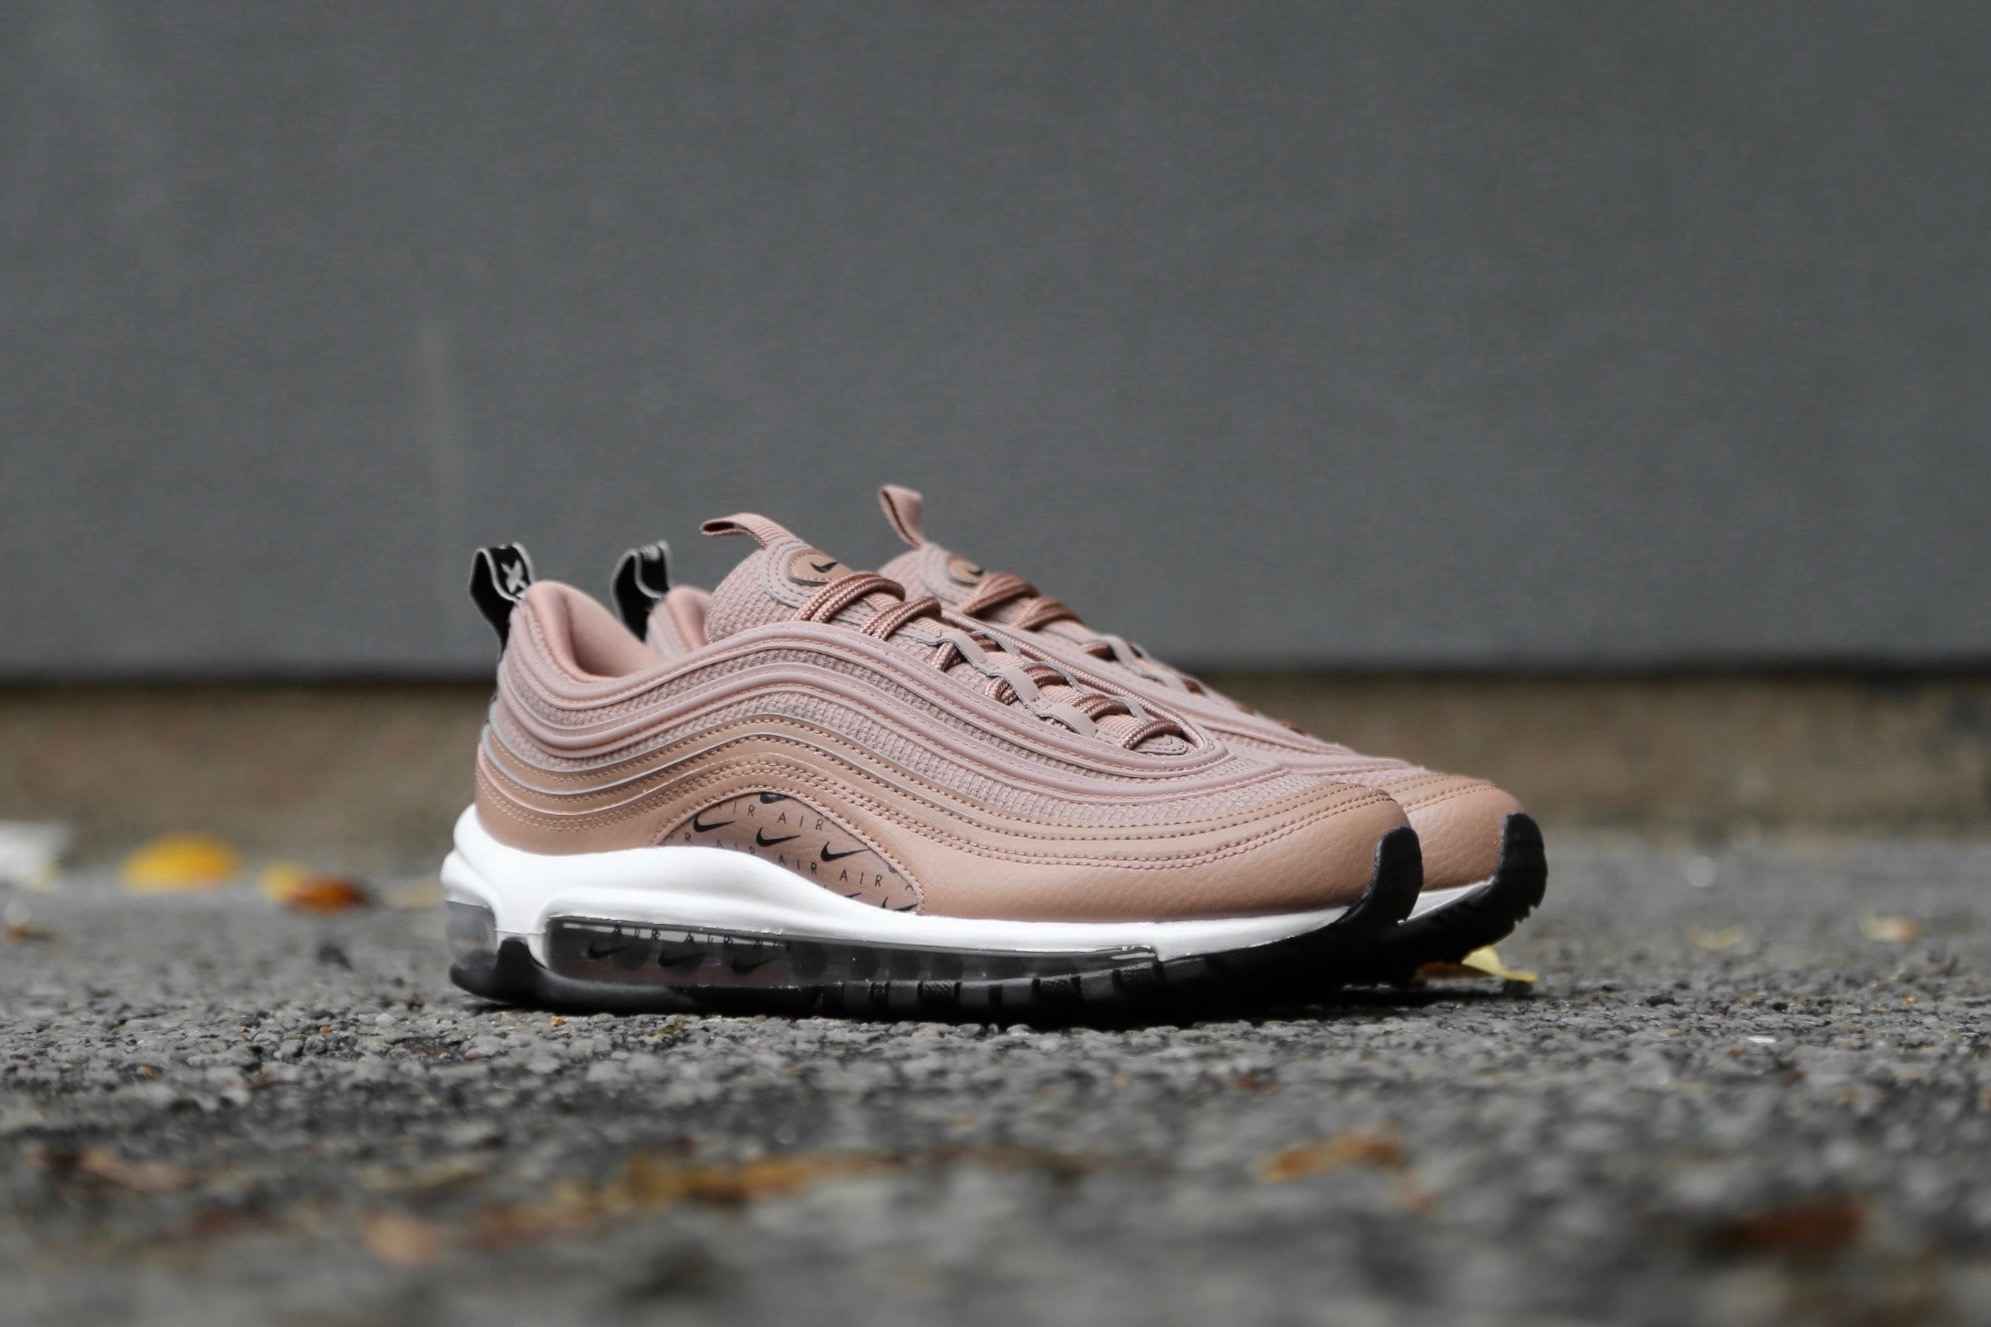 nombre Vástago Pensamiento Nike W Air Max 97 LX Overbranded – Desert Dust / Black / White – STASP